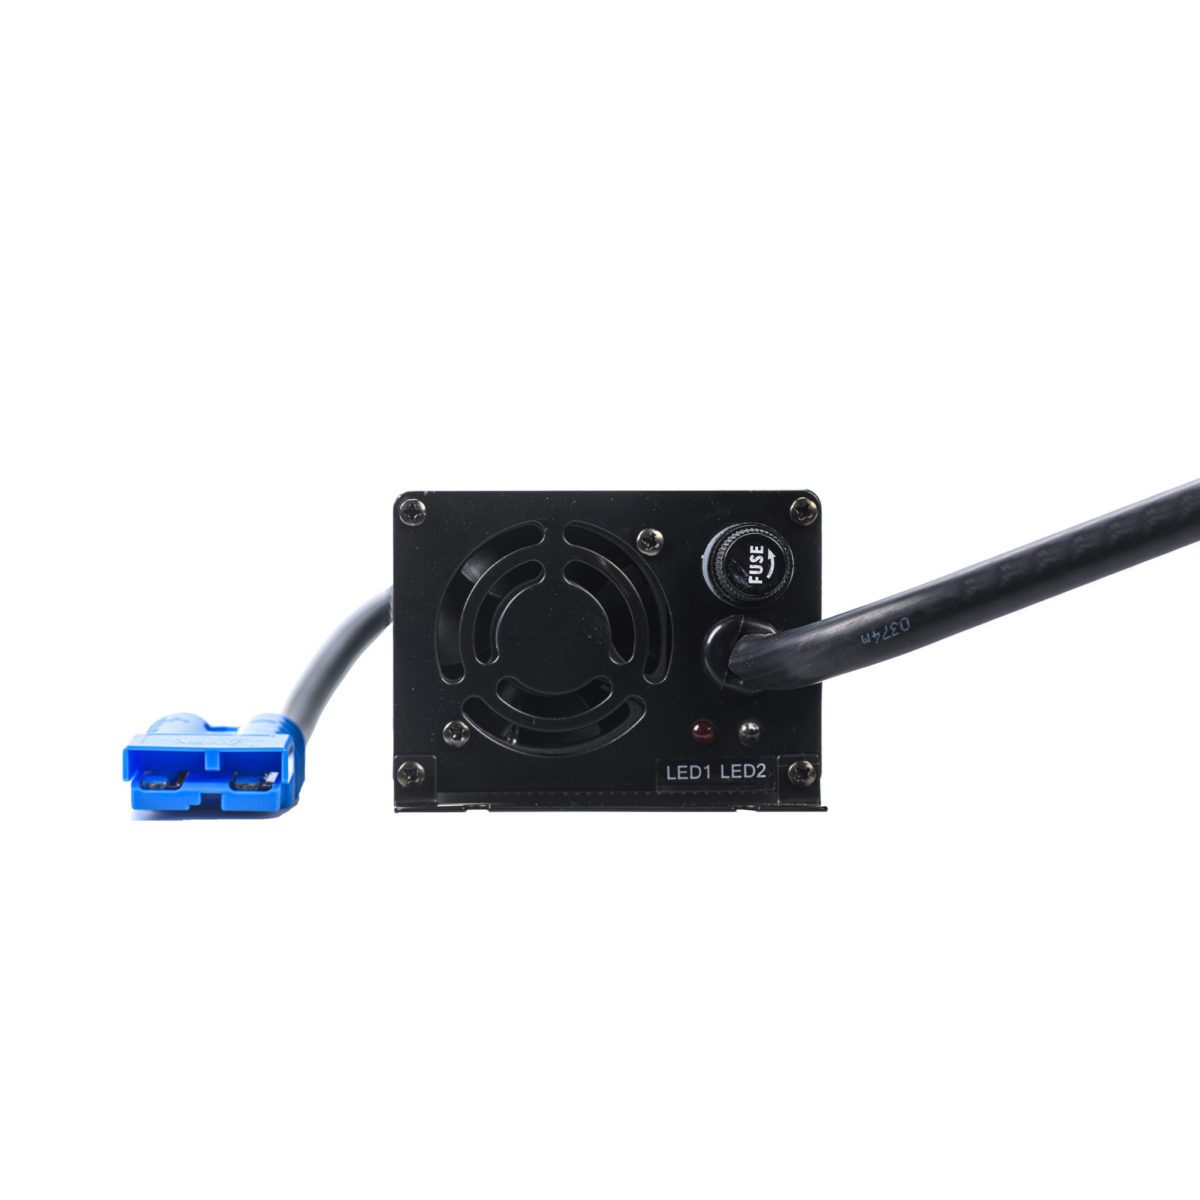 Rebelcell charger 12.6V20A for outdoorbox product image